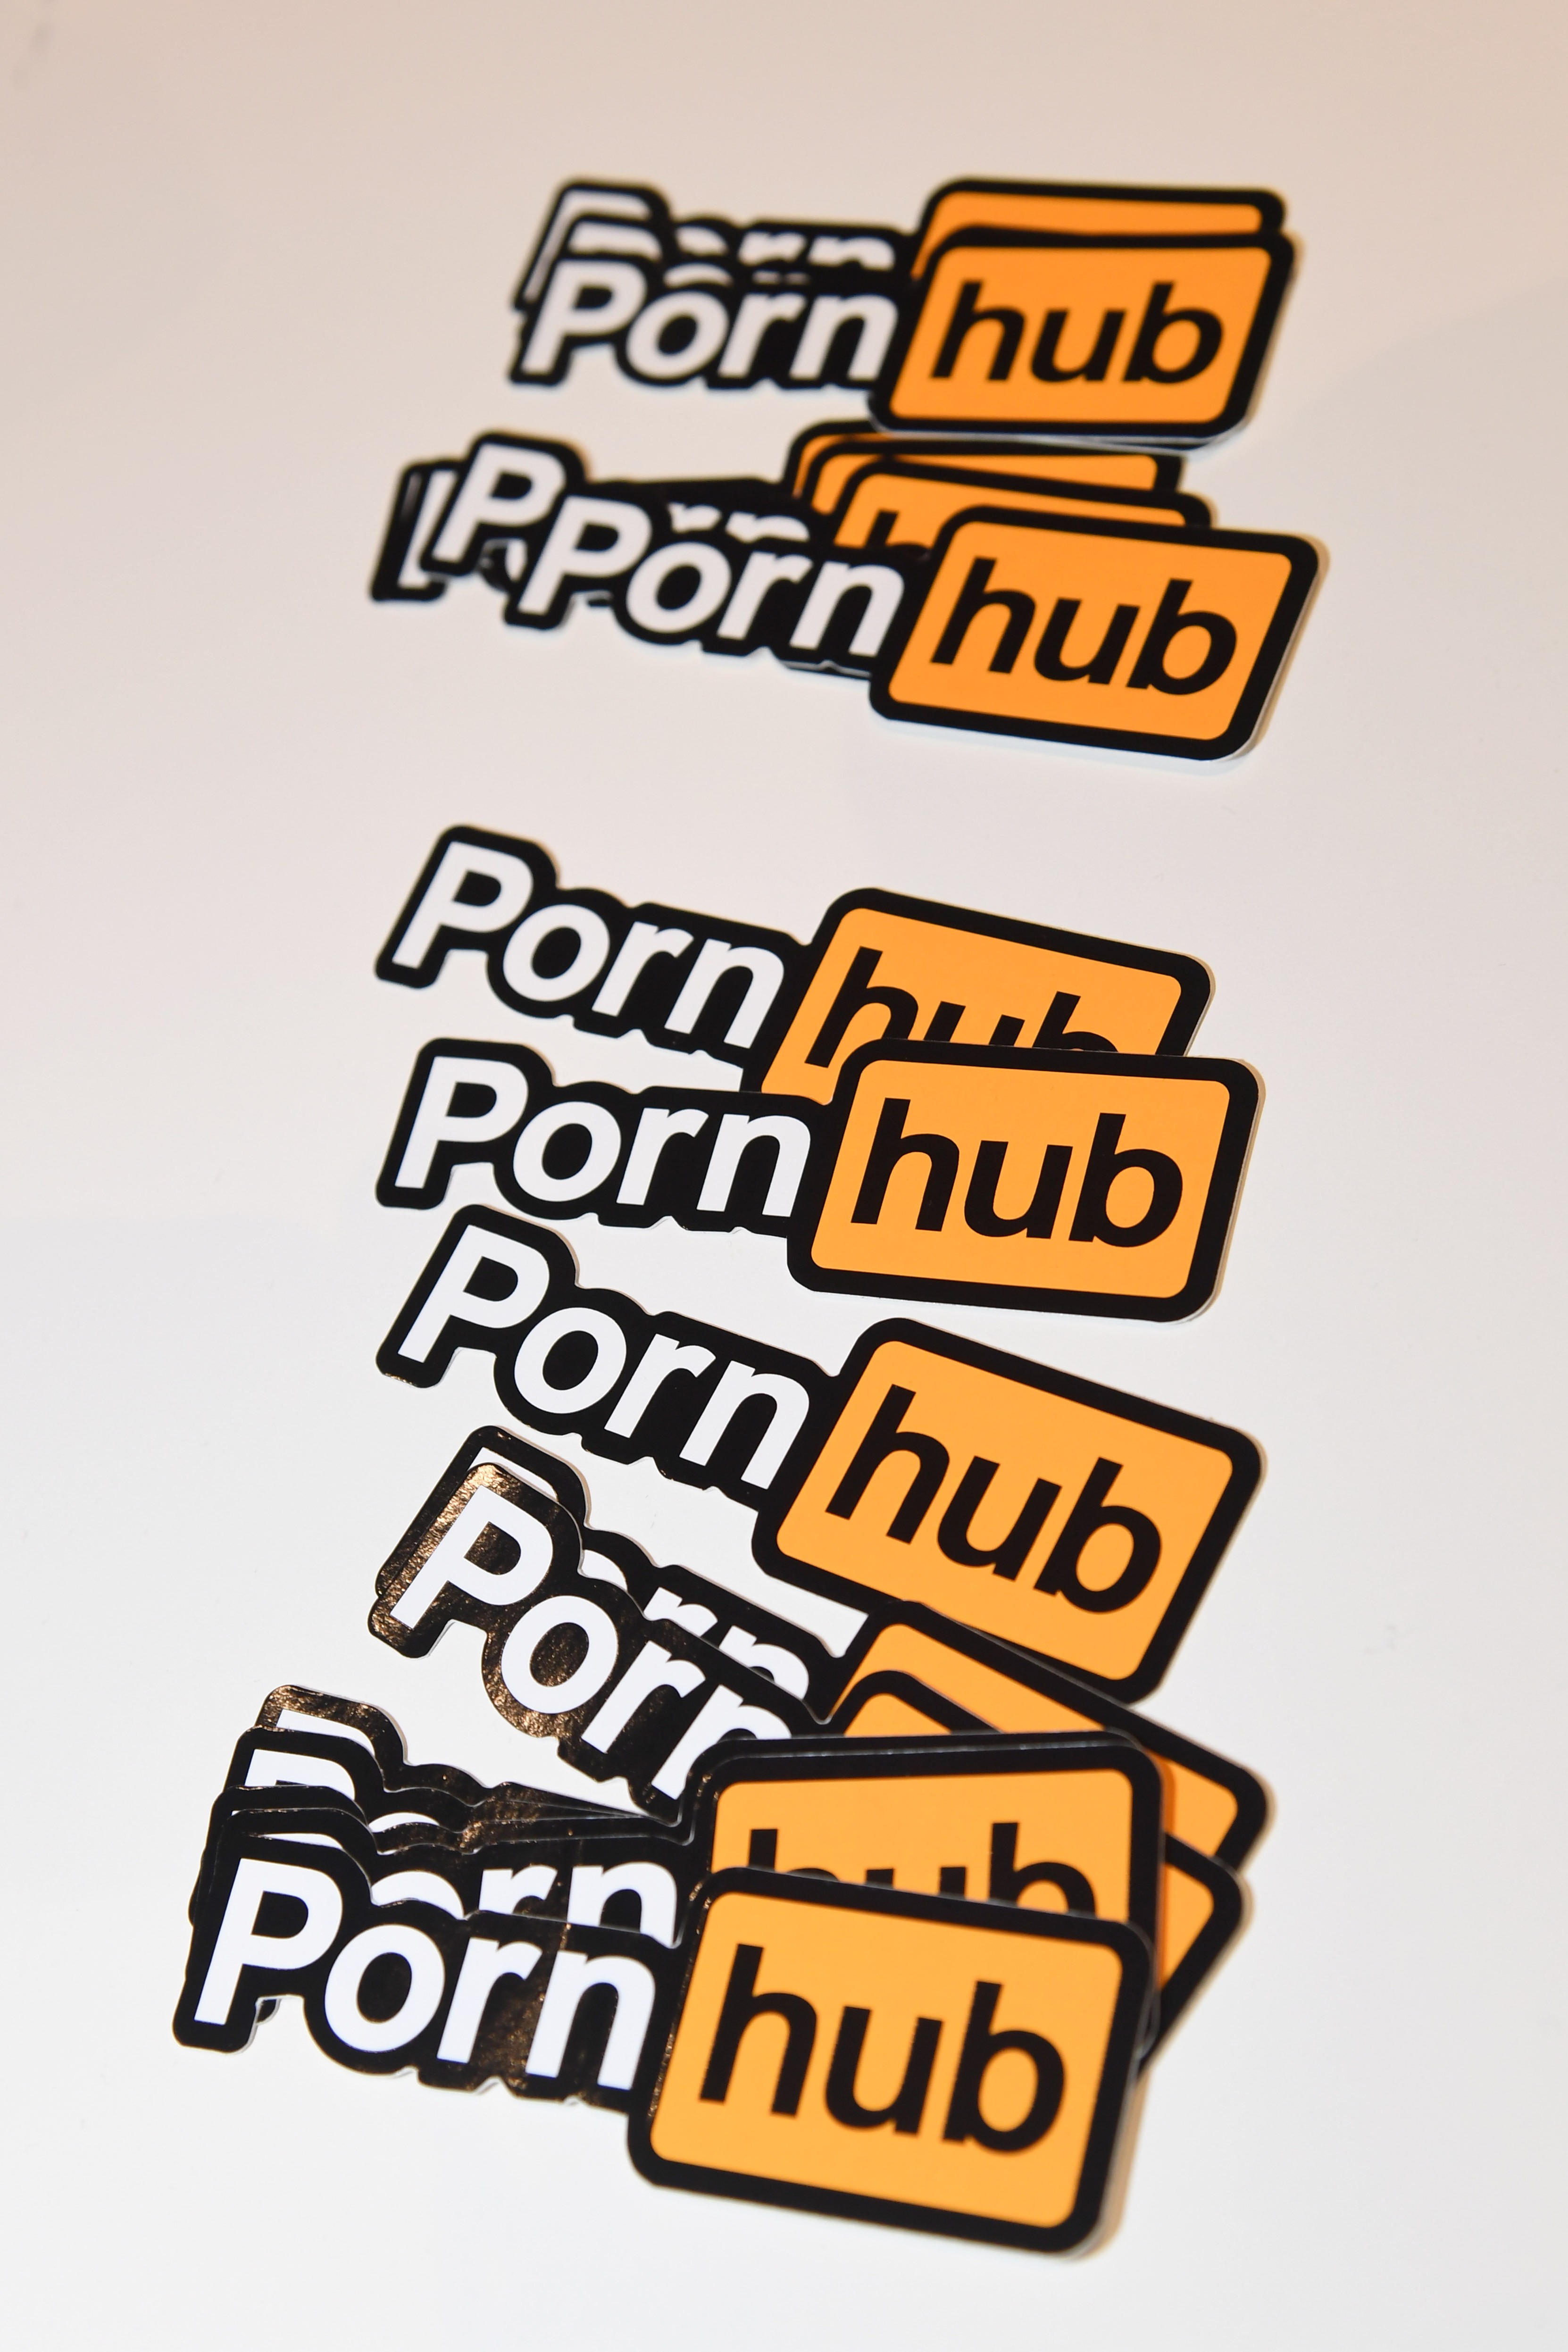 Porn Video Porn Hub Pornhub Just Purged All Unverified Content From the Platform